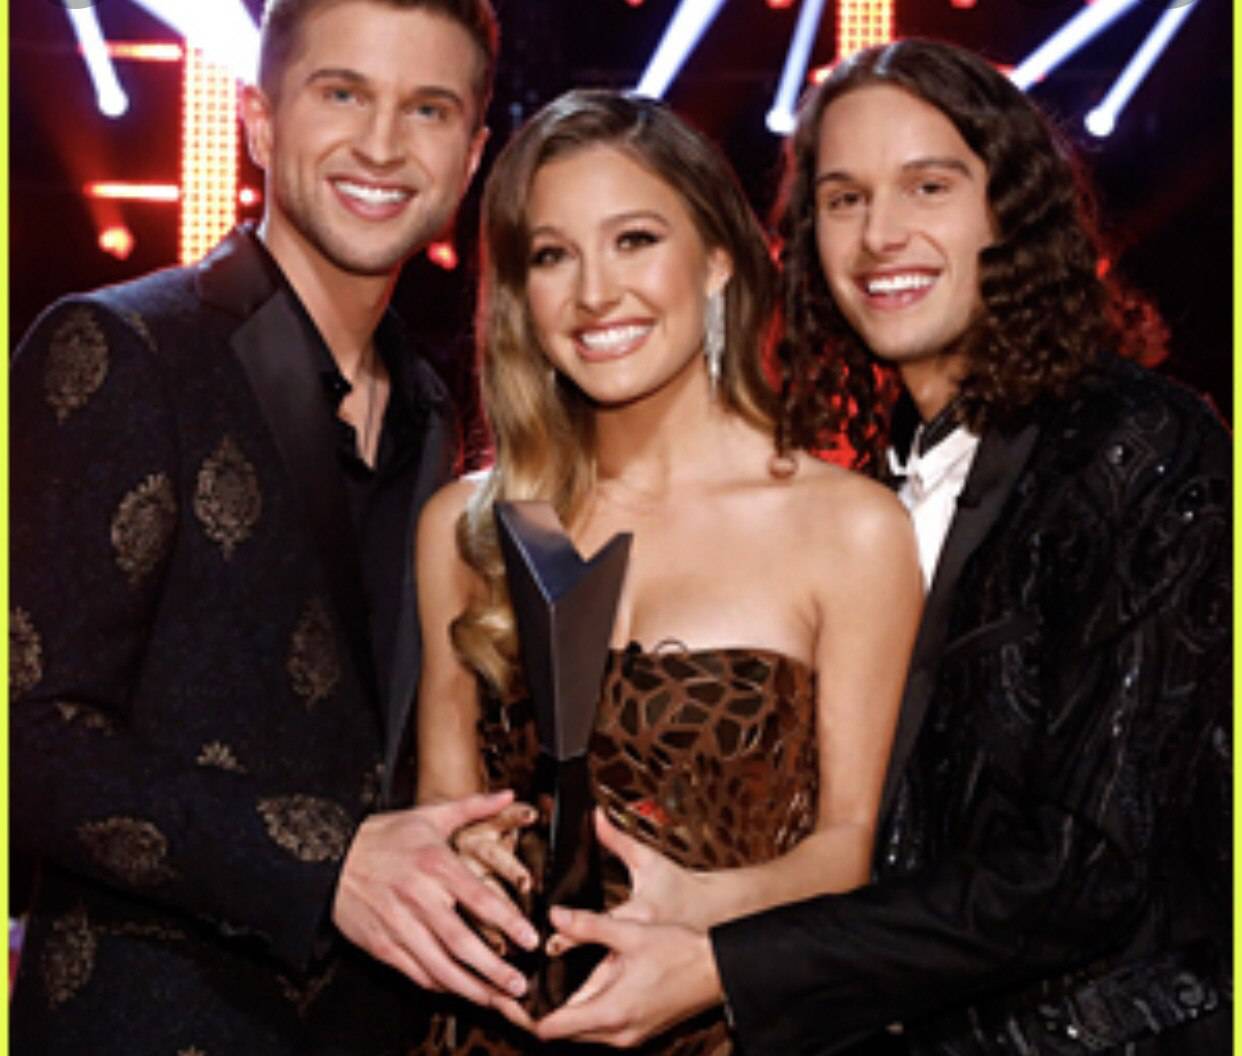 Girl Named Tom Reflect on 'The Voice' Win With Coach Kelly Clarkson